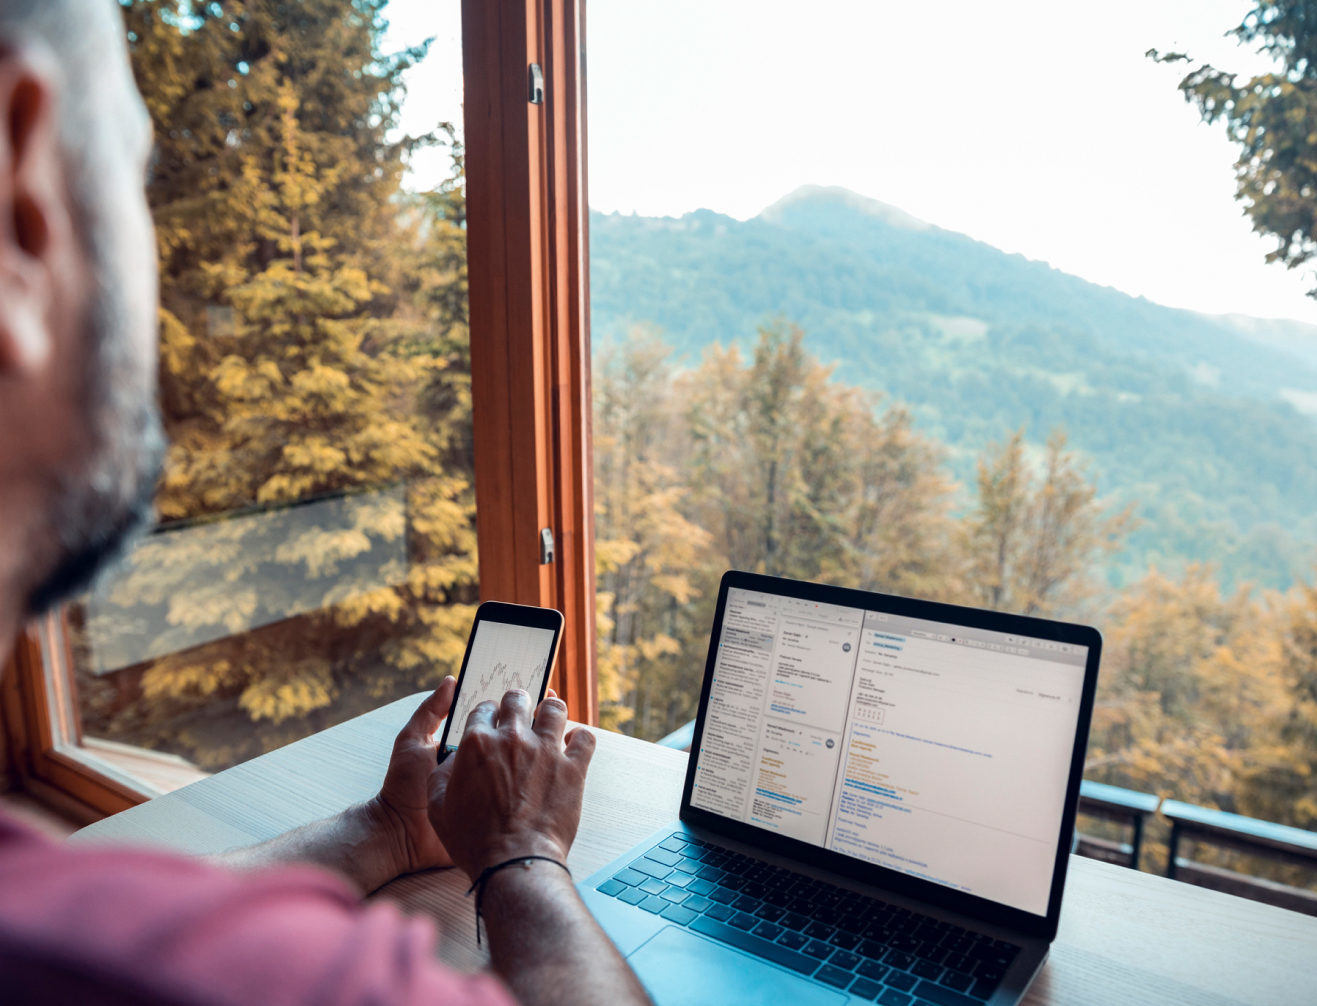 A individual working on their computer and phone in front of a large window overlooking the mountain and treetops.